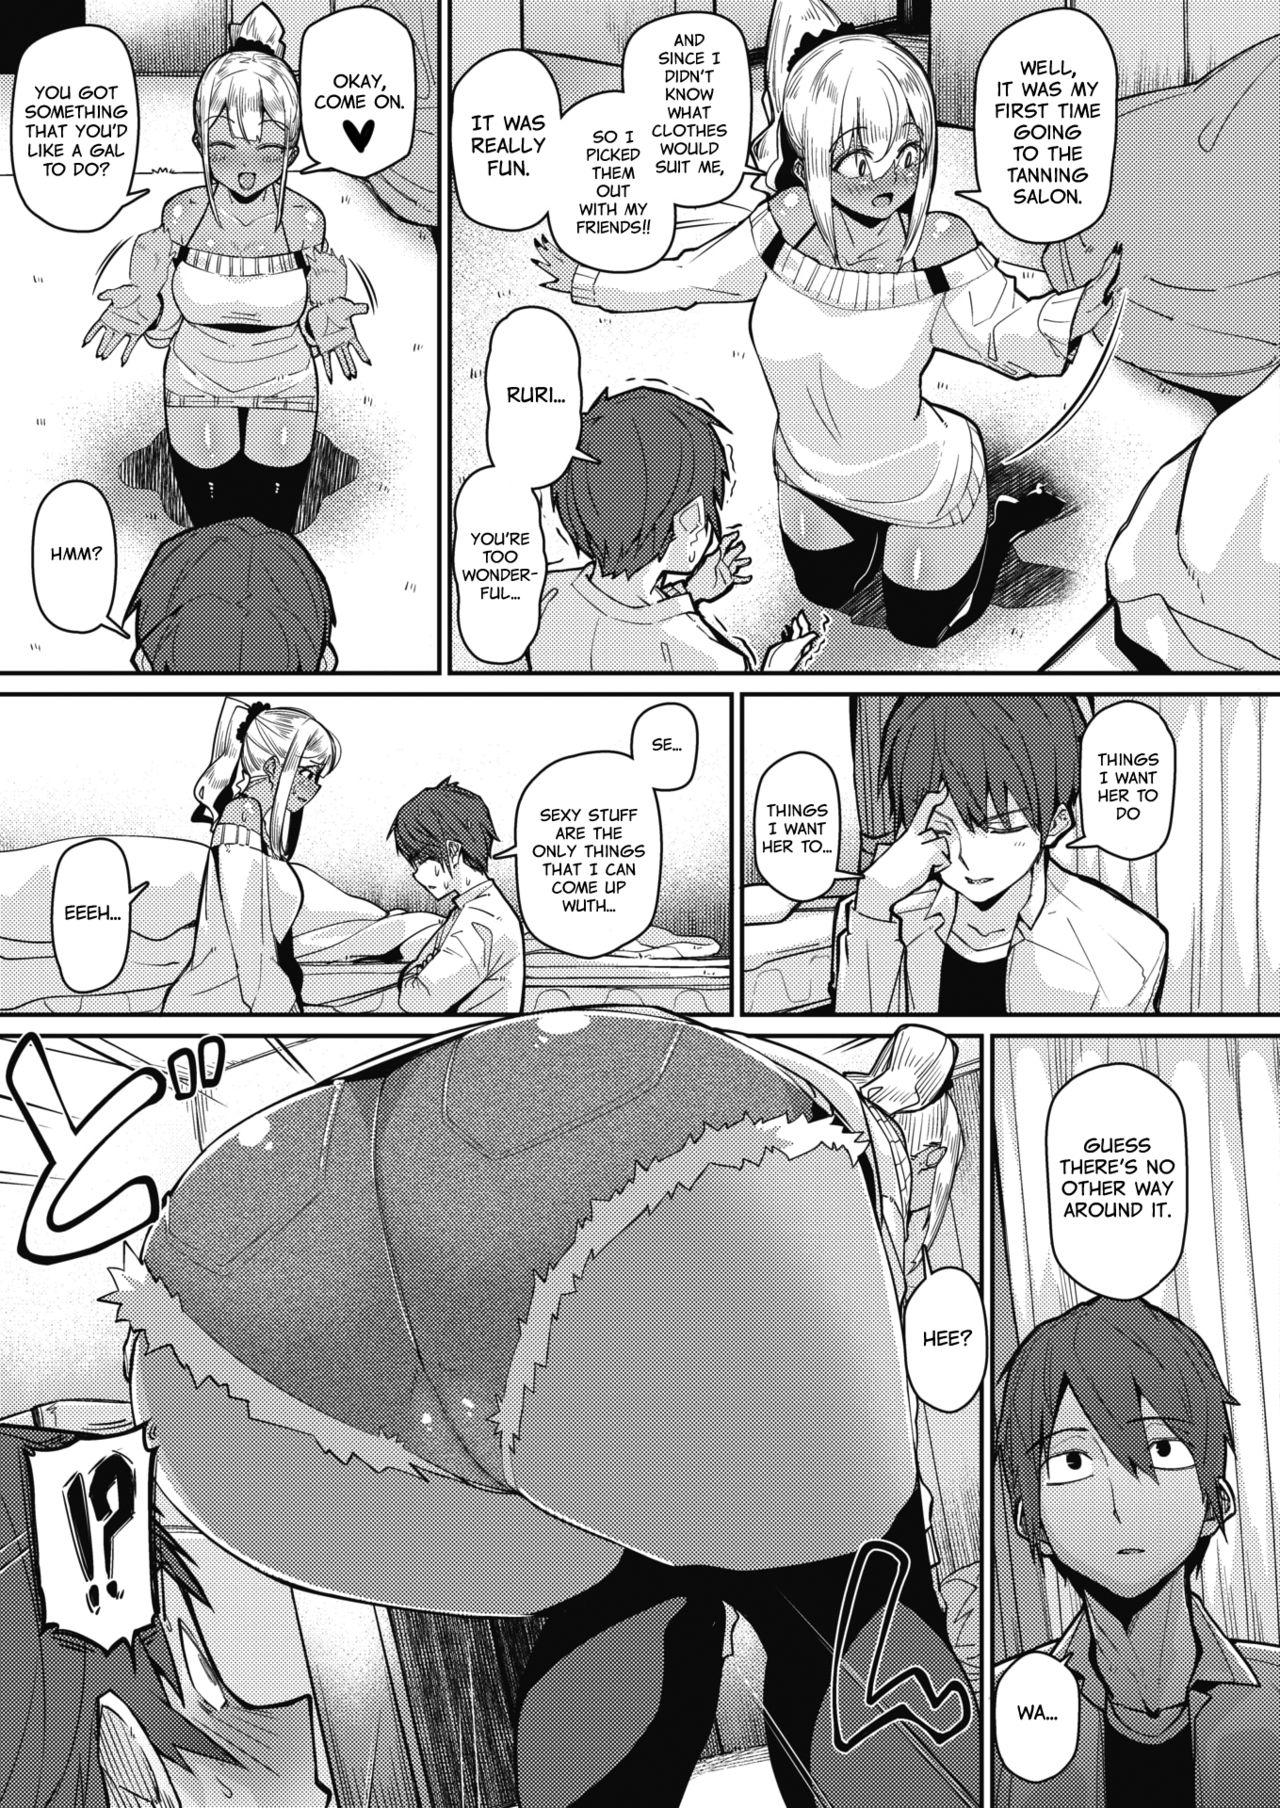 Bigdick Gekkan "Za Bicchi" wo Mita Onna no Hannou ni Tsuite | About the Reaction of the Girl Who Saw "The Bitch Monthly" Sentando - Page 5